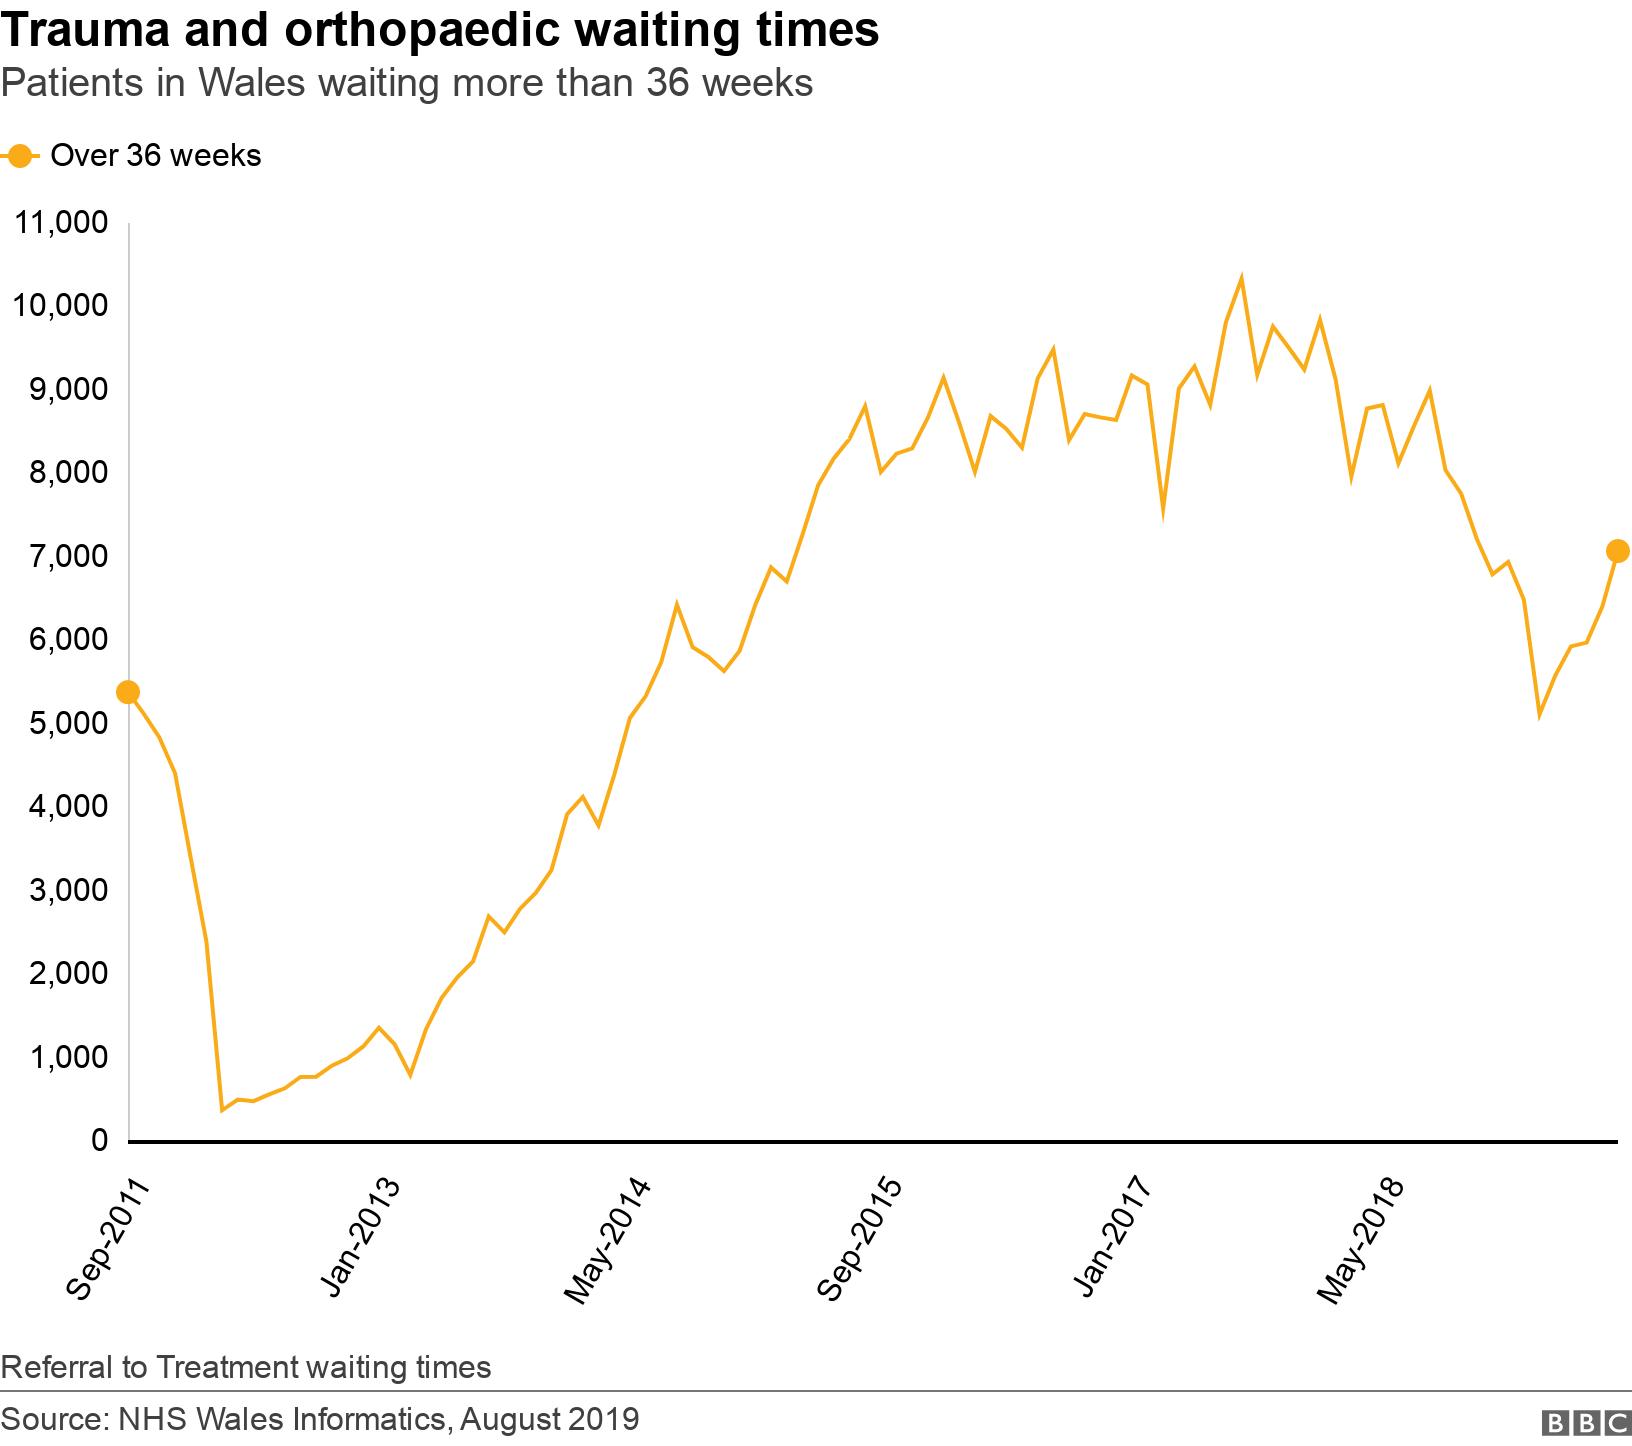 Trauma and orthopaedic waiting times. Patients in Wales waiting more than 36 weeks. Referral to Treatment waiting times.